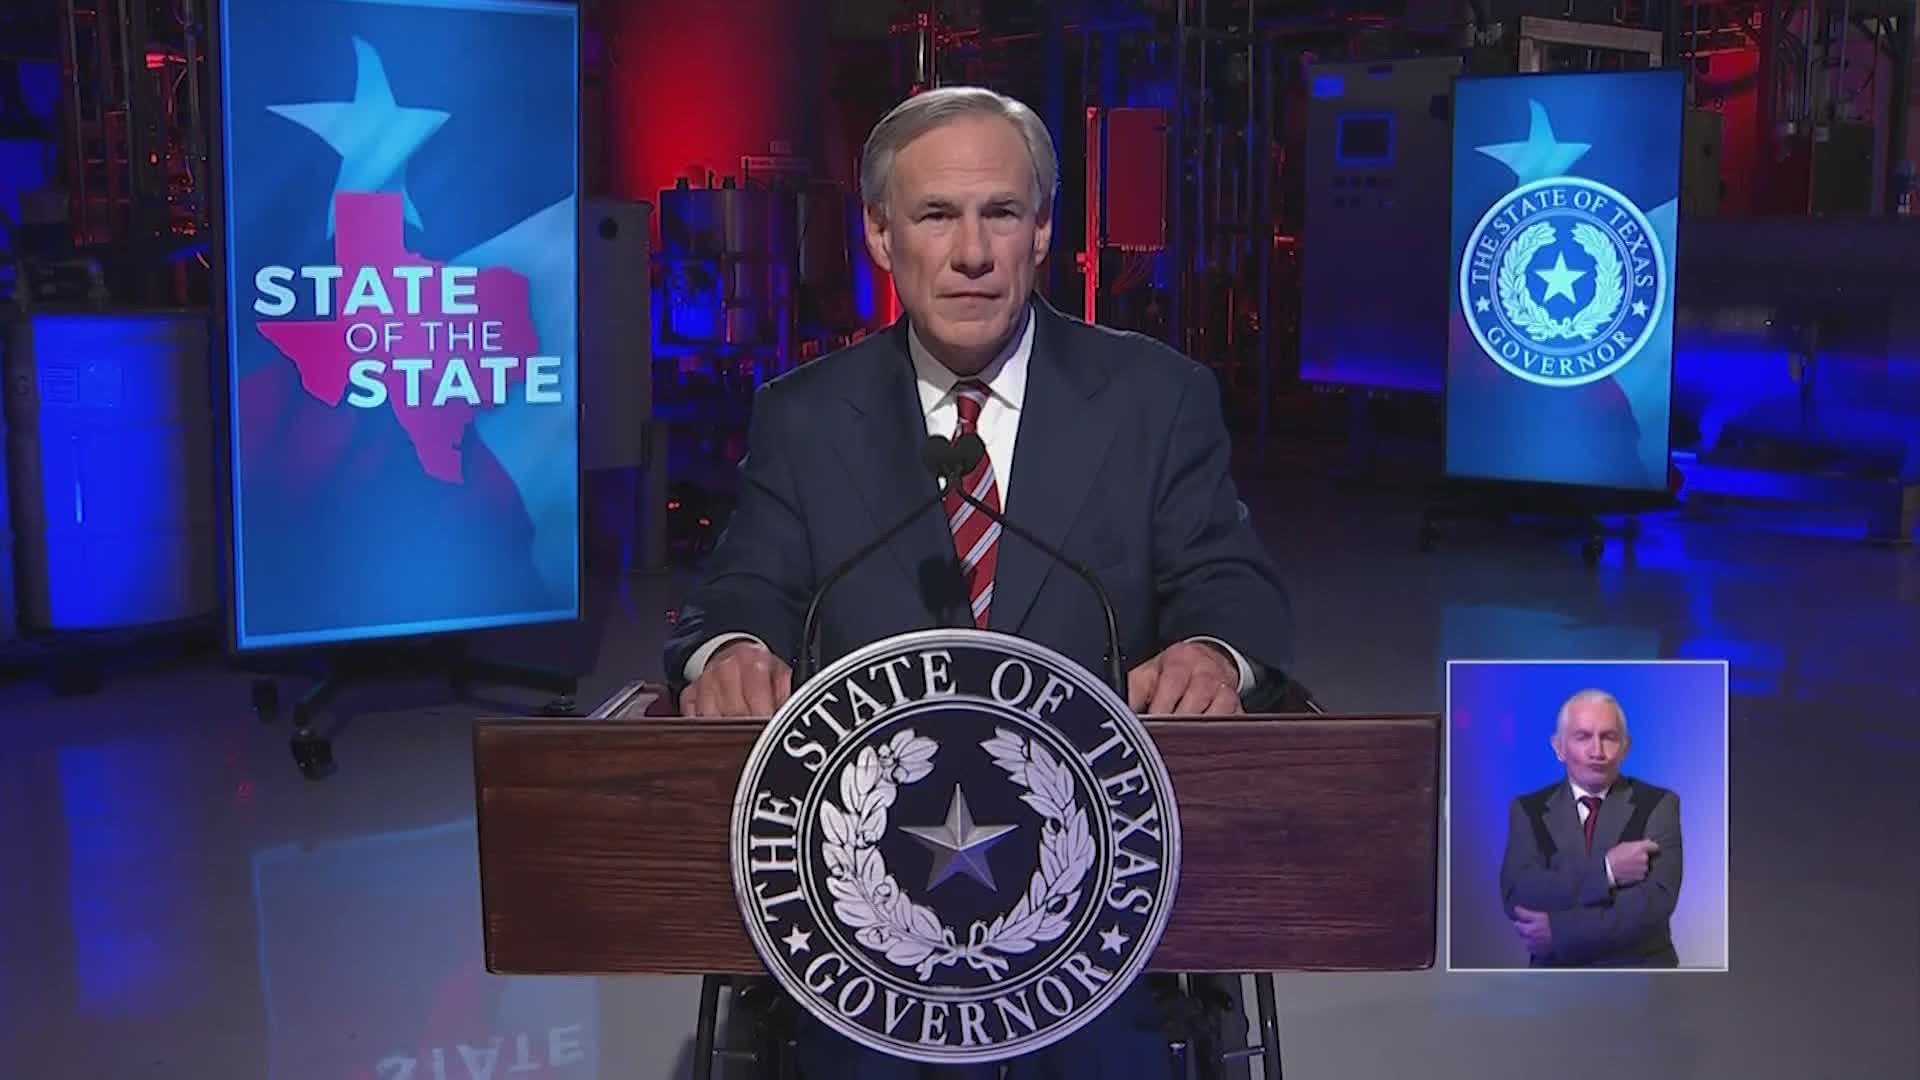 Gov. Abbott spoke about what he plans to do in the legislative session, plus the COVID vaccine rollout and more.